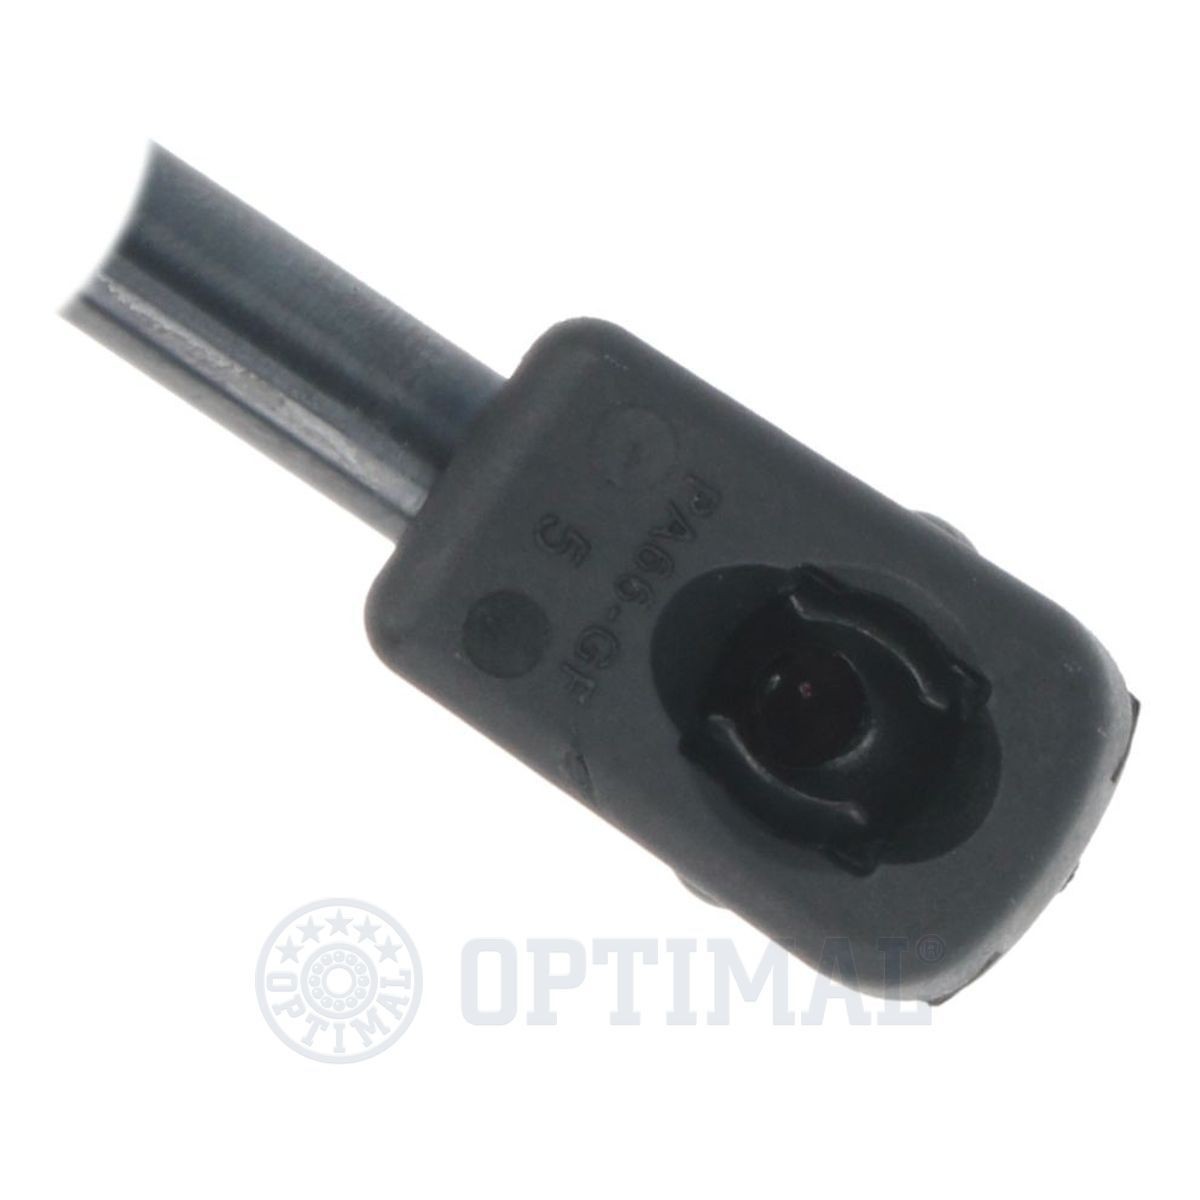 Tailgate struts OPTIMAL 680N, for vehicles with rear windown wiper, with spoiler - AG-17228